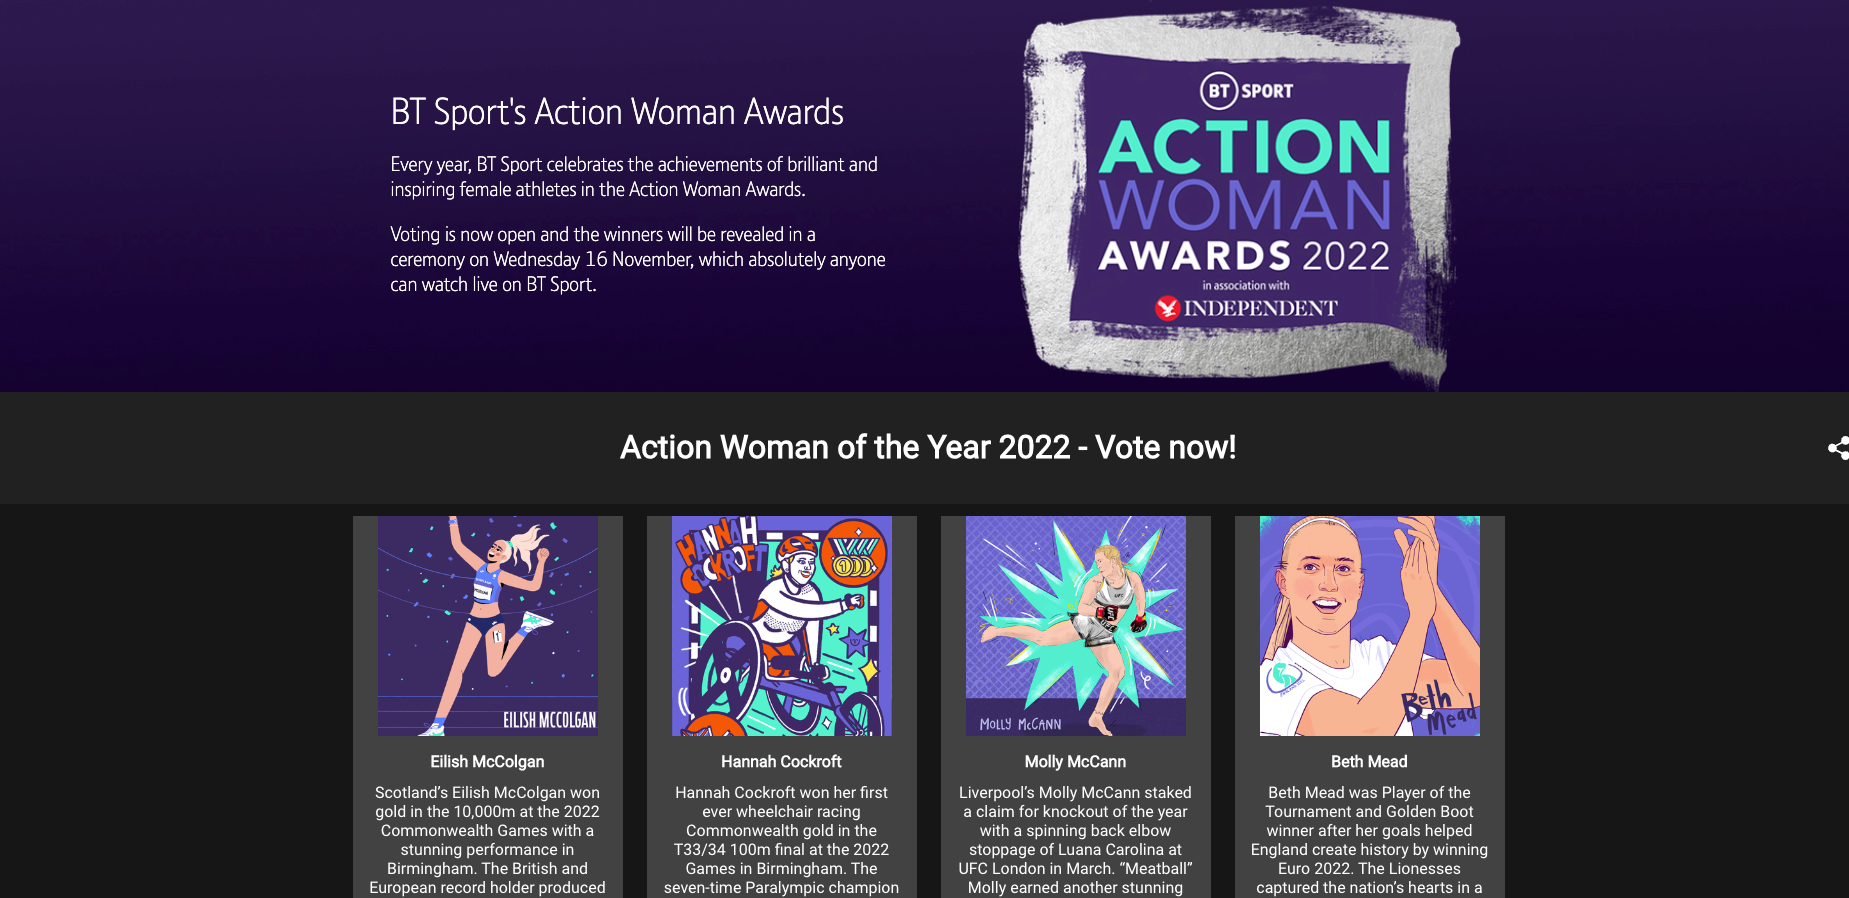 Have your say in the BT Sport’s Action Woman Awards and vote by clicking here . Winners will be announced at the awards ceremony on Wednesday 16 November and broadcast live for anyone to watch on BT Sport, online and on Facebook and YouTube.